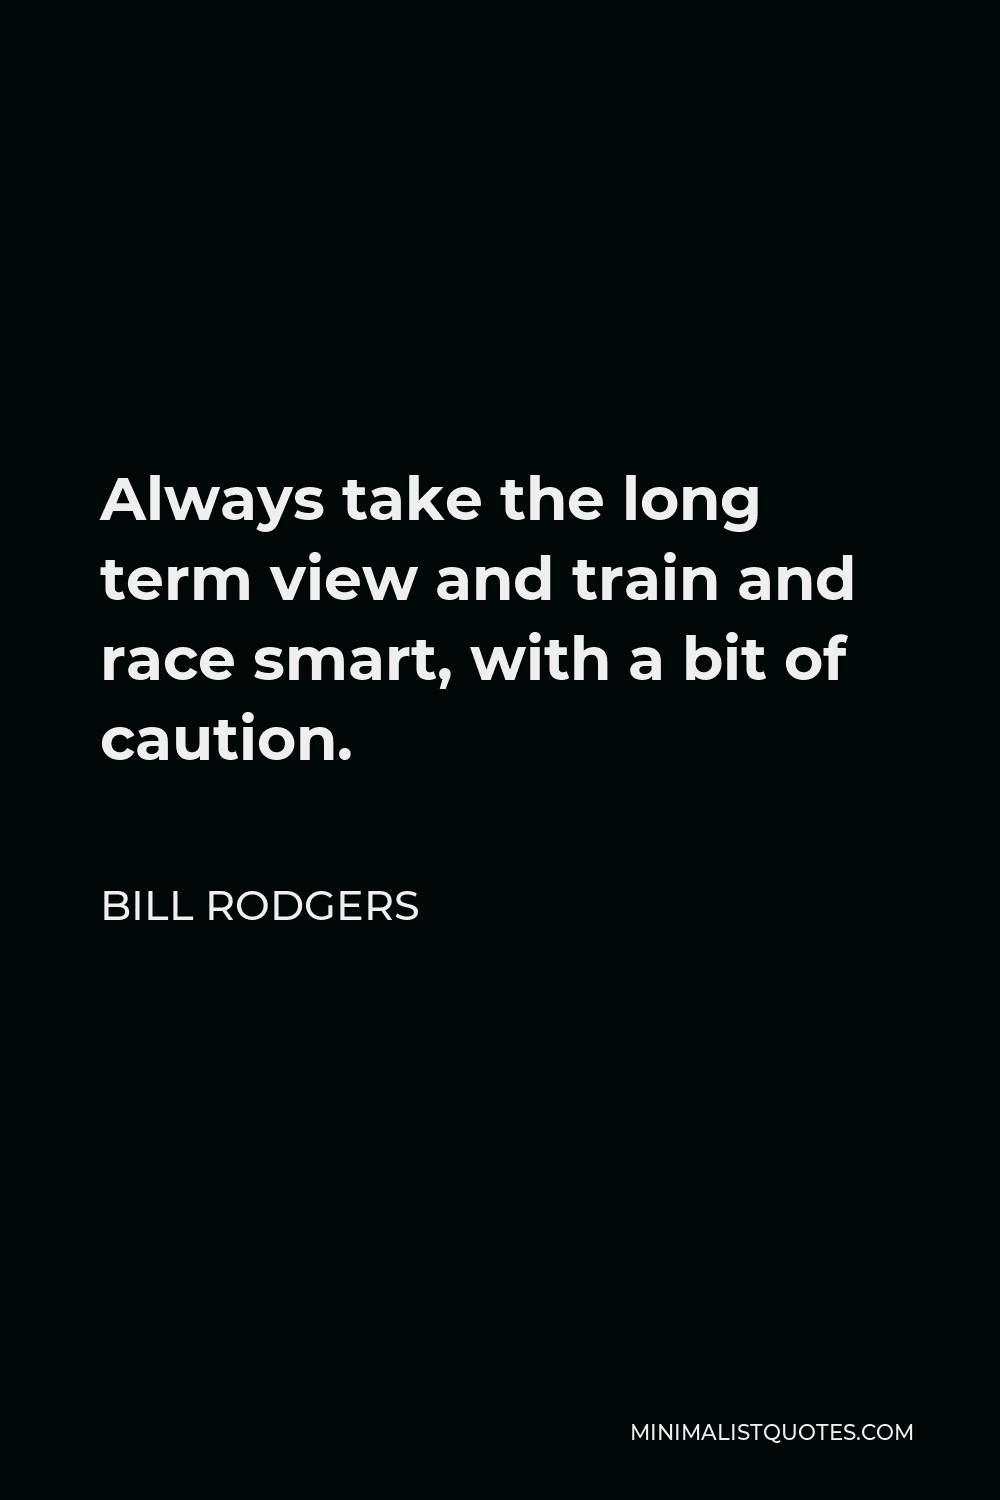 Bill Rodgers Quote - Always take the long term view and train and race smart, with a bit of caution.